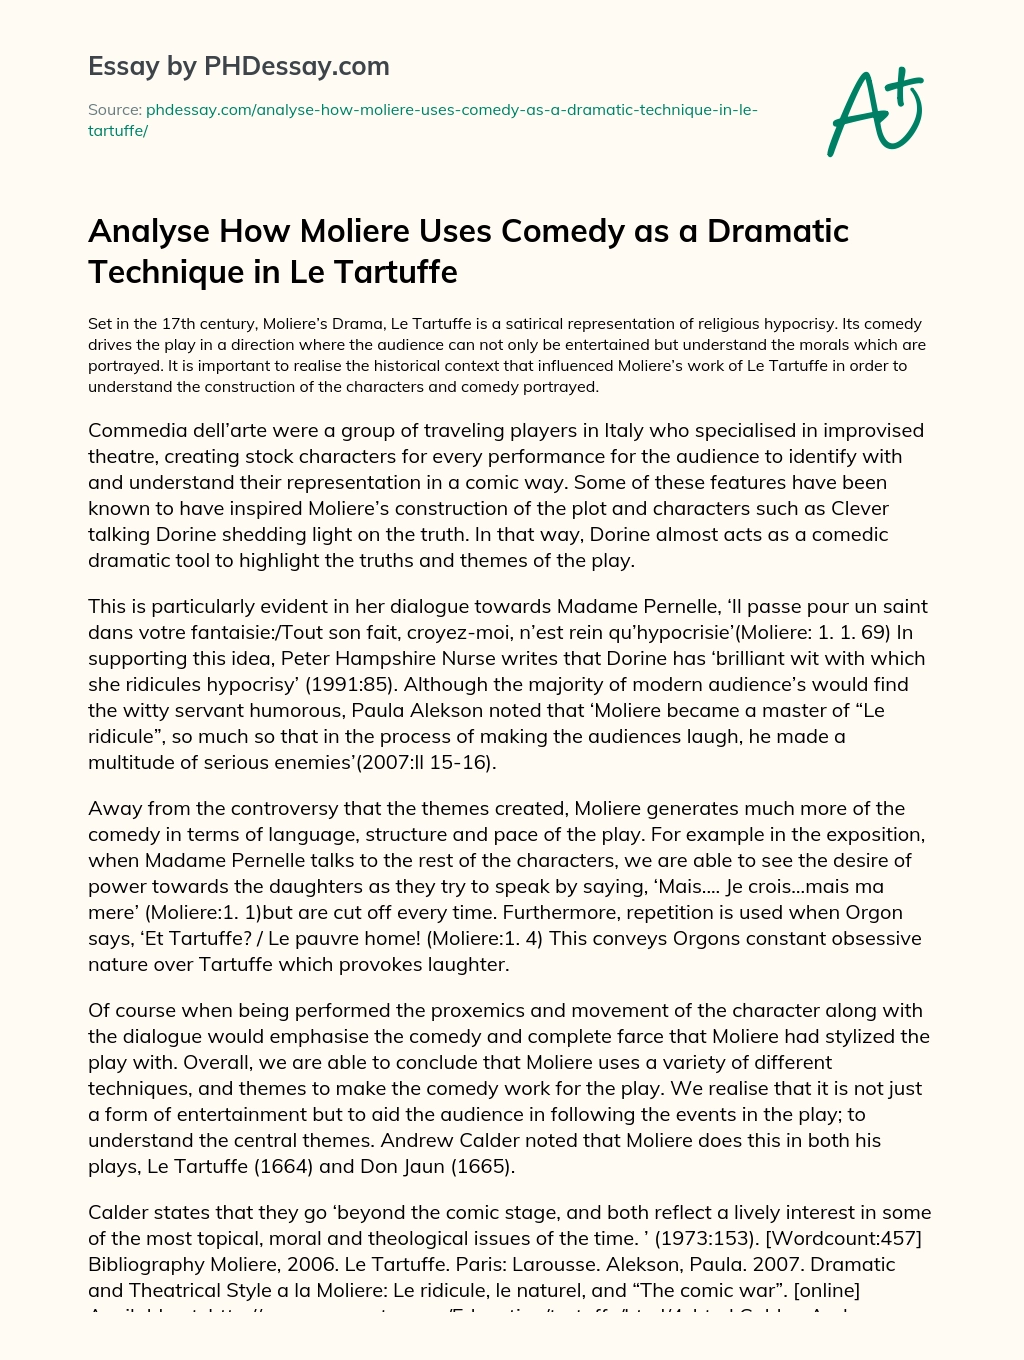 Analyse How Moliere Uses Comedy as a Dramatic Technique in Le Tartuffe essay